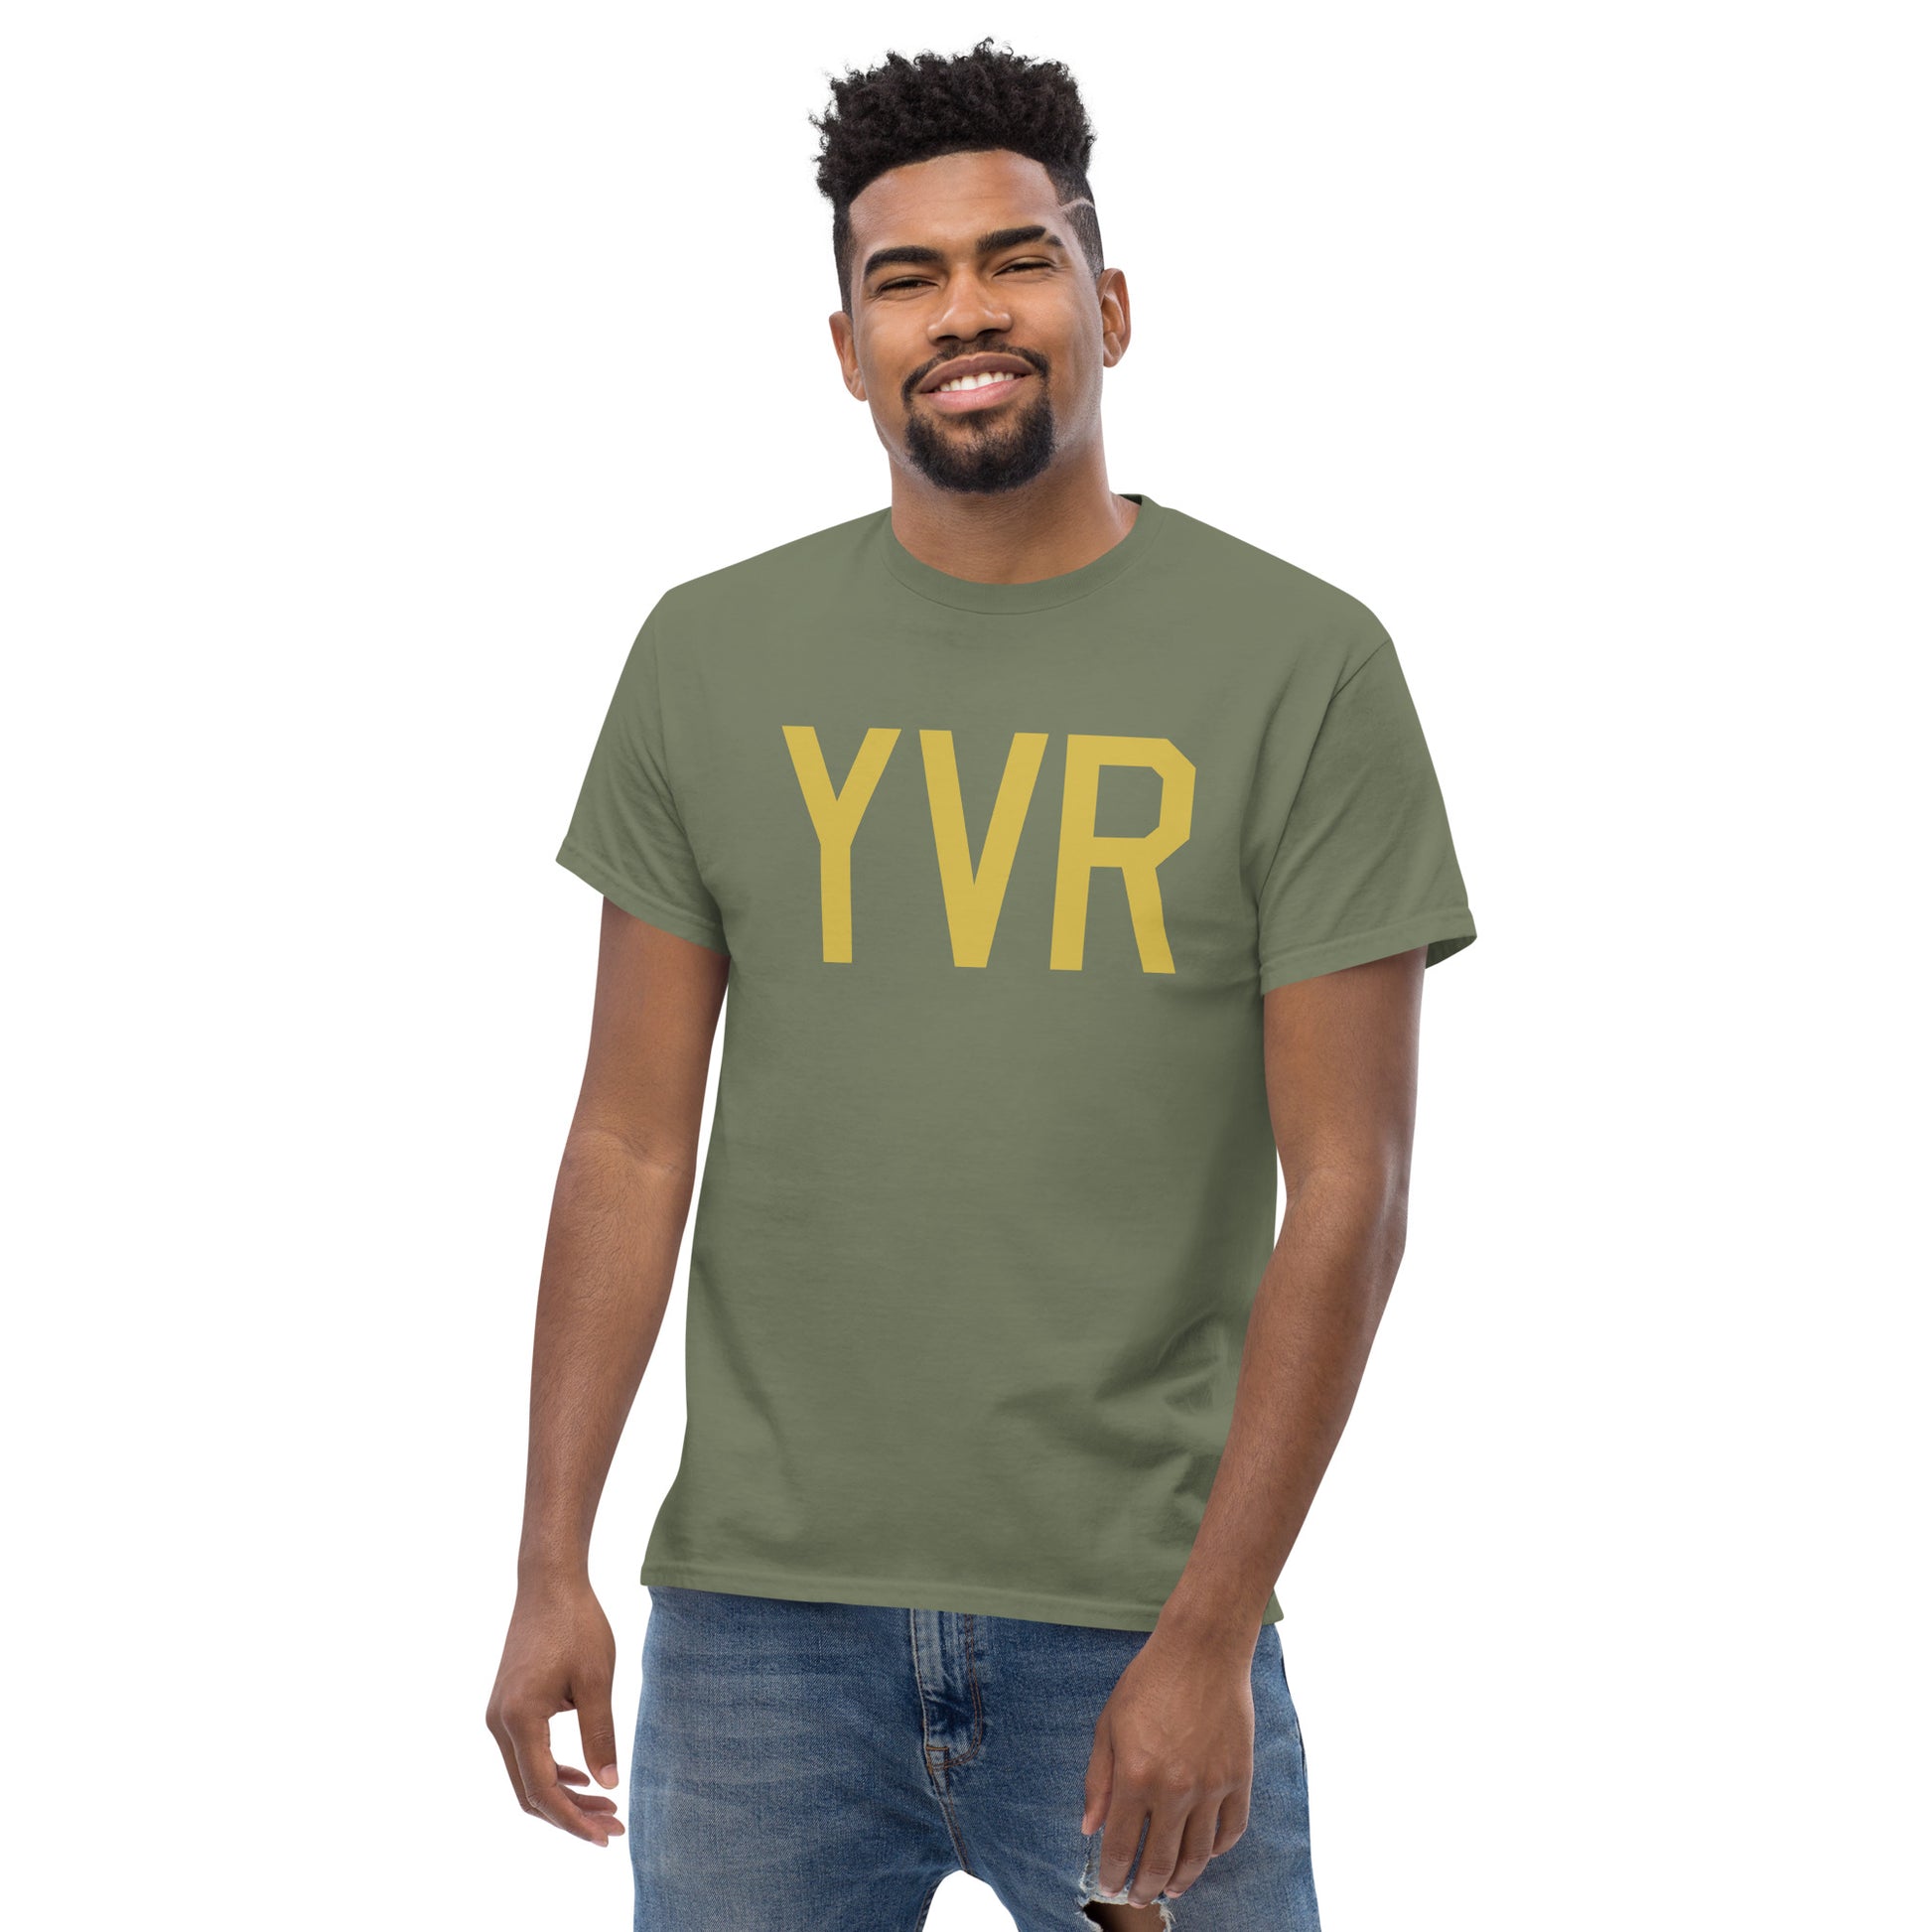 Aviation Enthusiast Men's Tee - Old Gold Graphic • YVR Vancouver • YHM Designs - Image 06